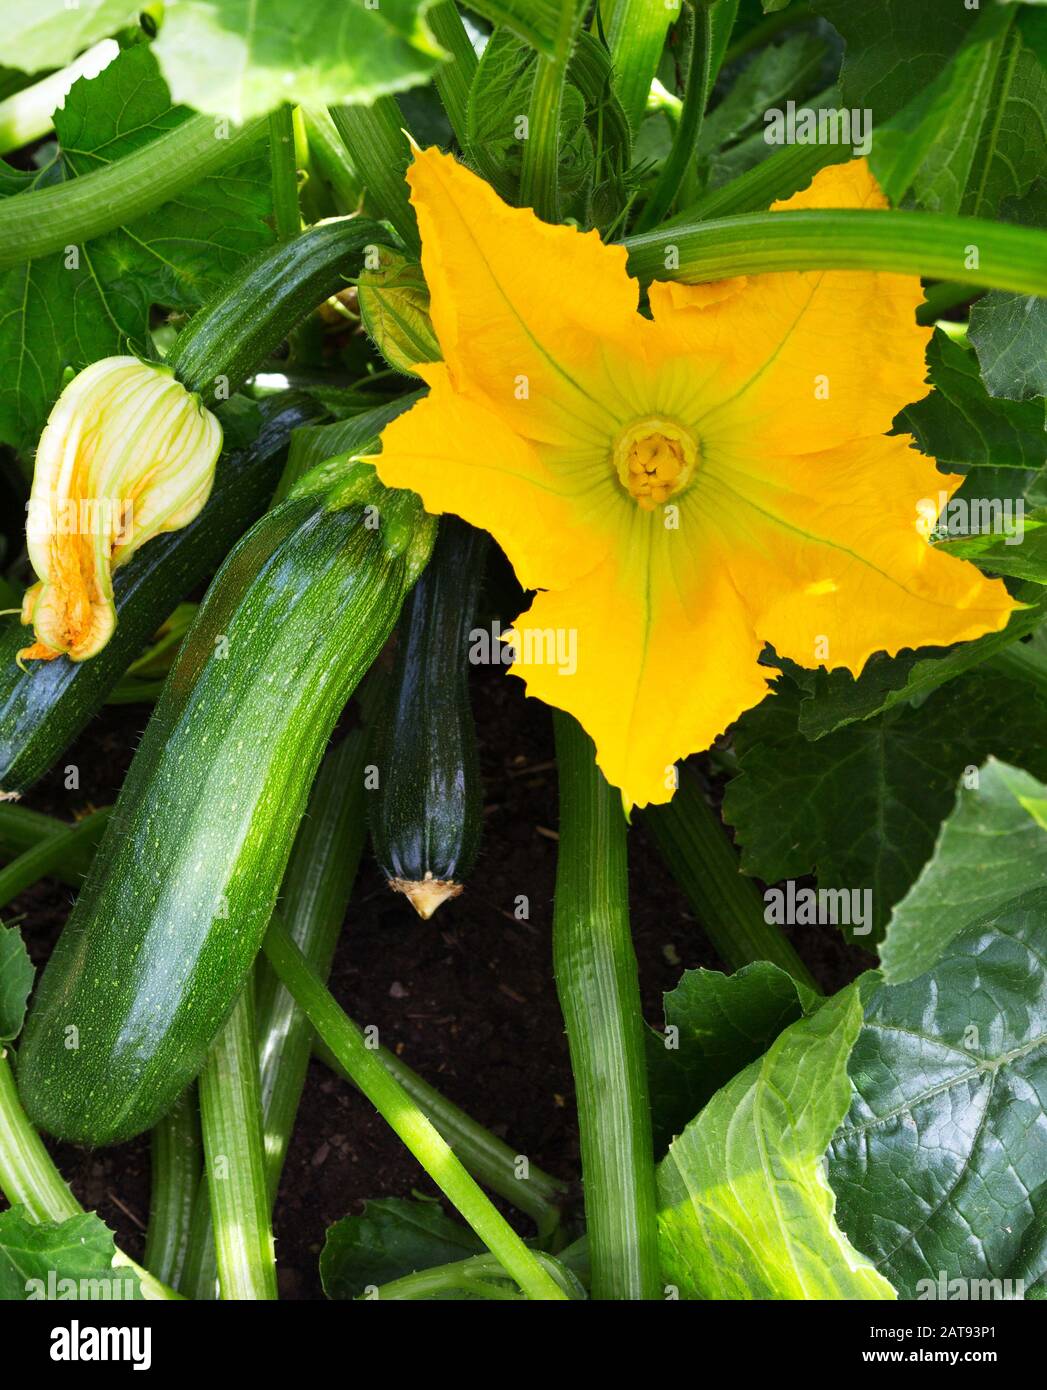 Zucchini plant.  Zucchini with flower and fruit in field. Green vegetable marrow growing on bush. Courgettes blossoms. Stock Photo